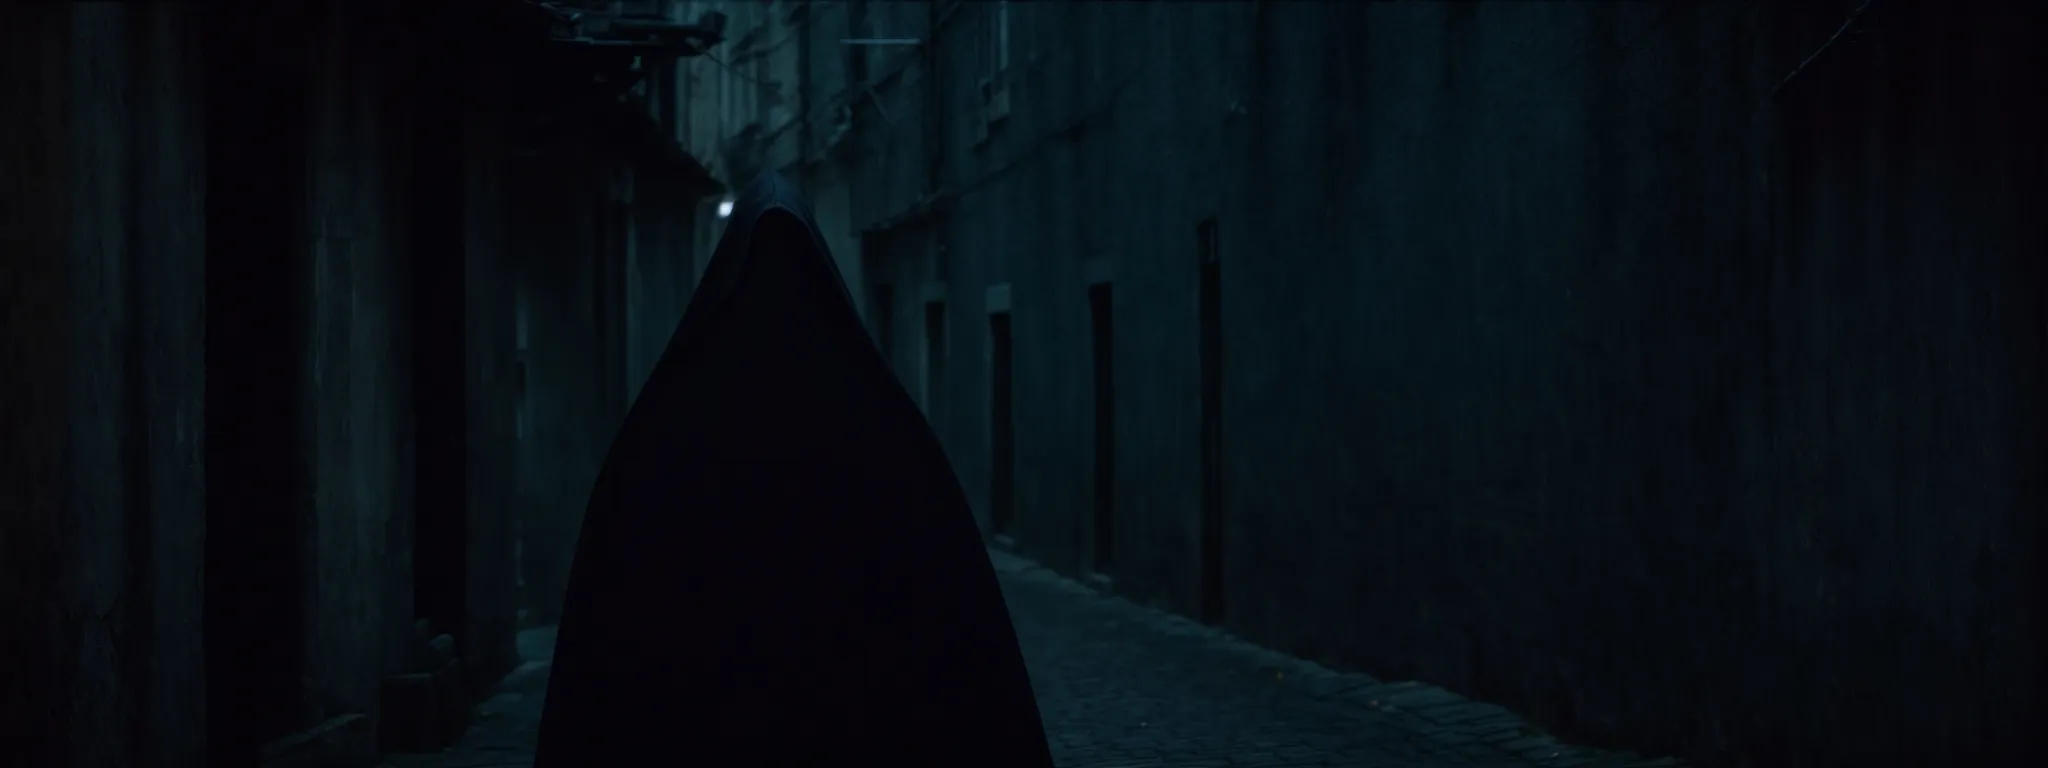 a cloaked figure slips through a dark, shadowy alleyway, a fitting metaphor for the elusive and unethical nature of black hat seo tactics.